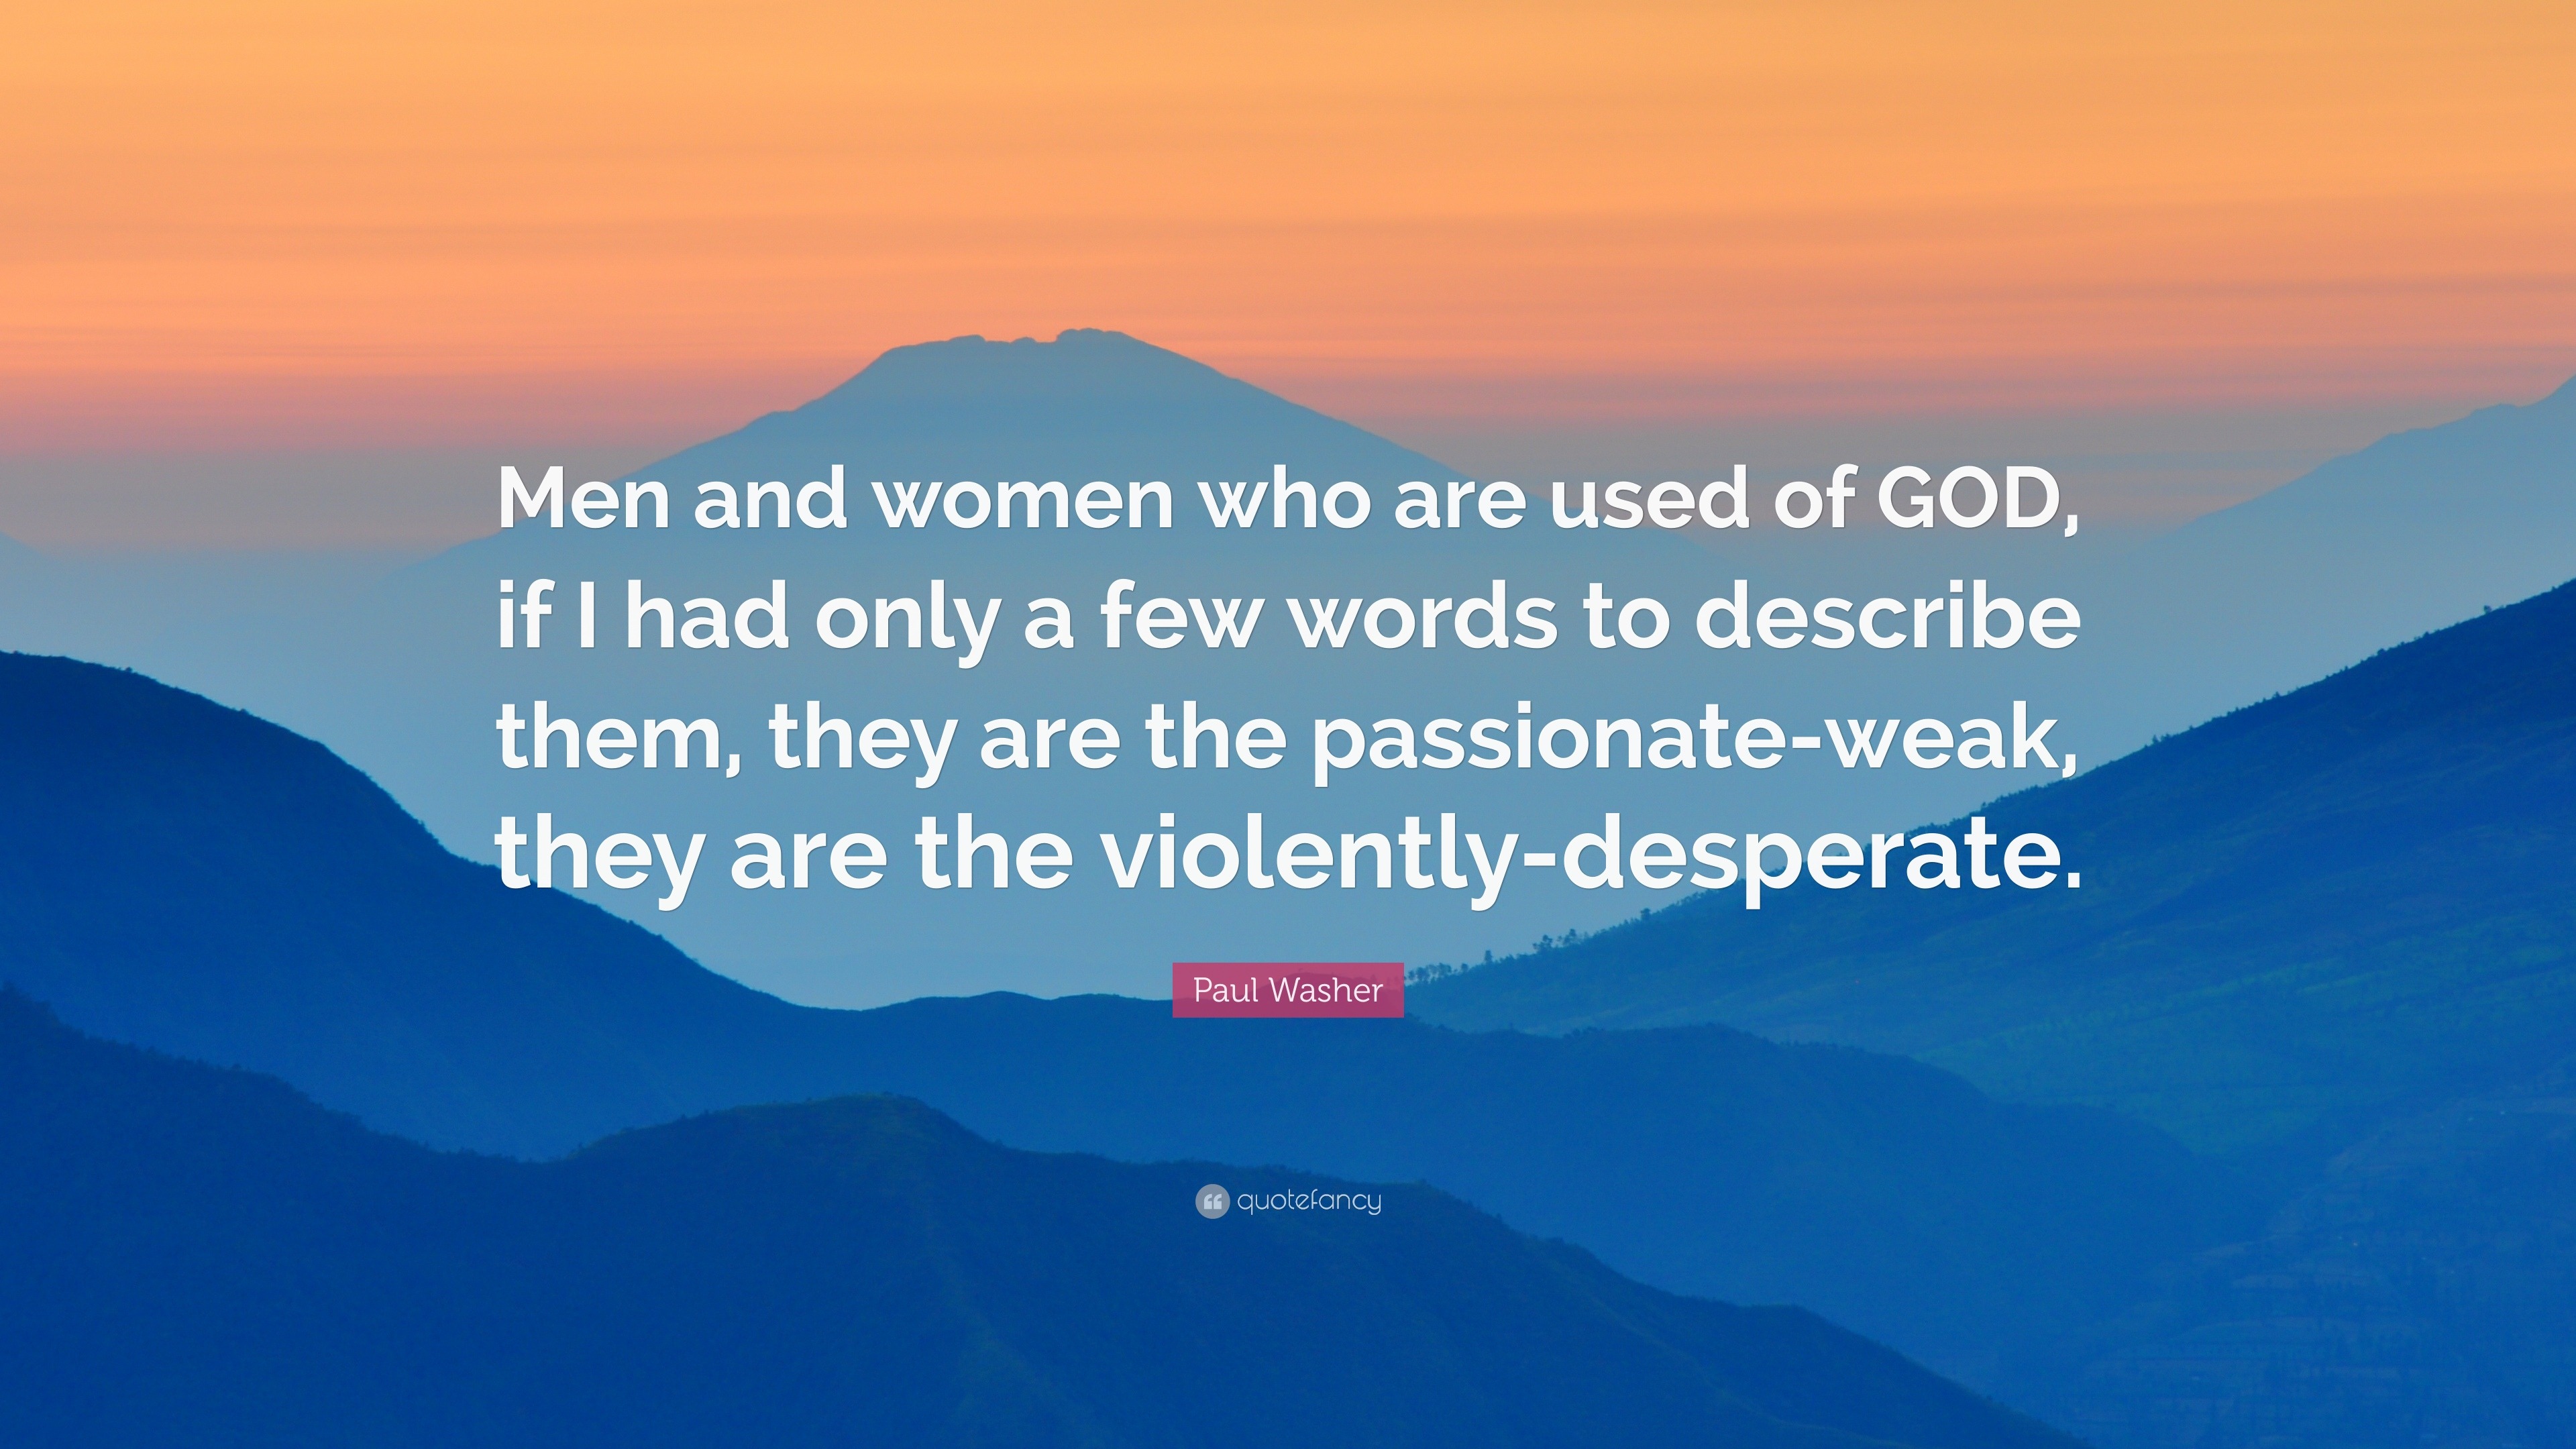 Paul Washer Quote: “Men and women who are used of GOD, if I had only a ...